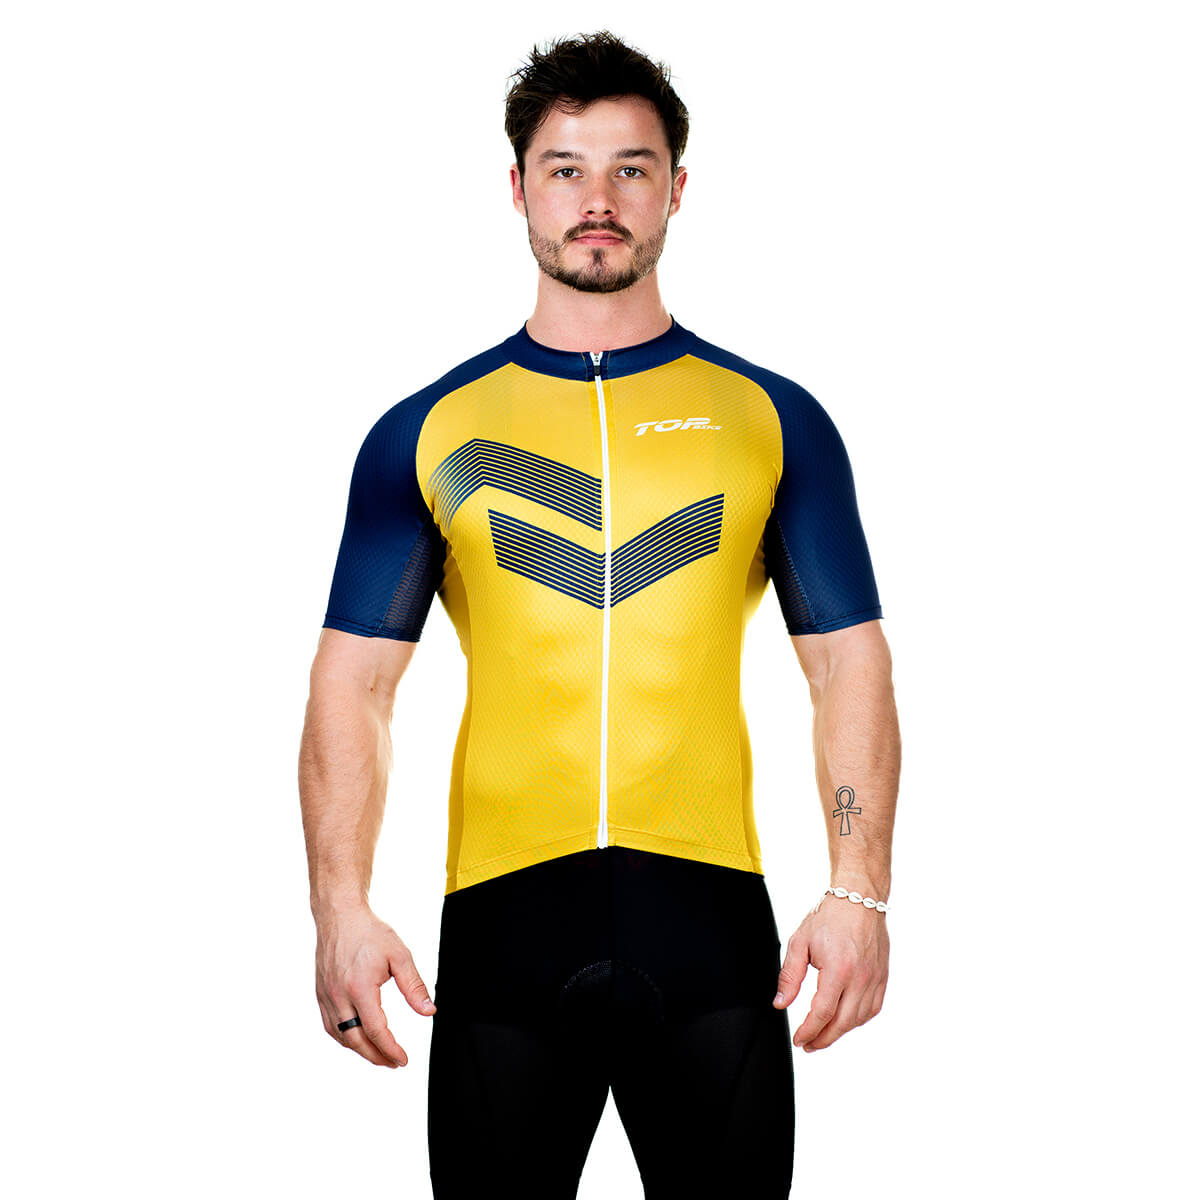 The ELASTIK collection brings an anatomically shaped jersey